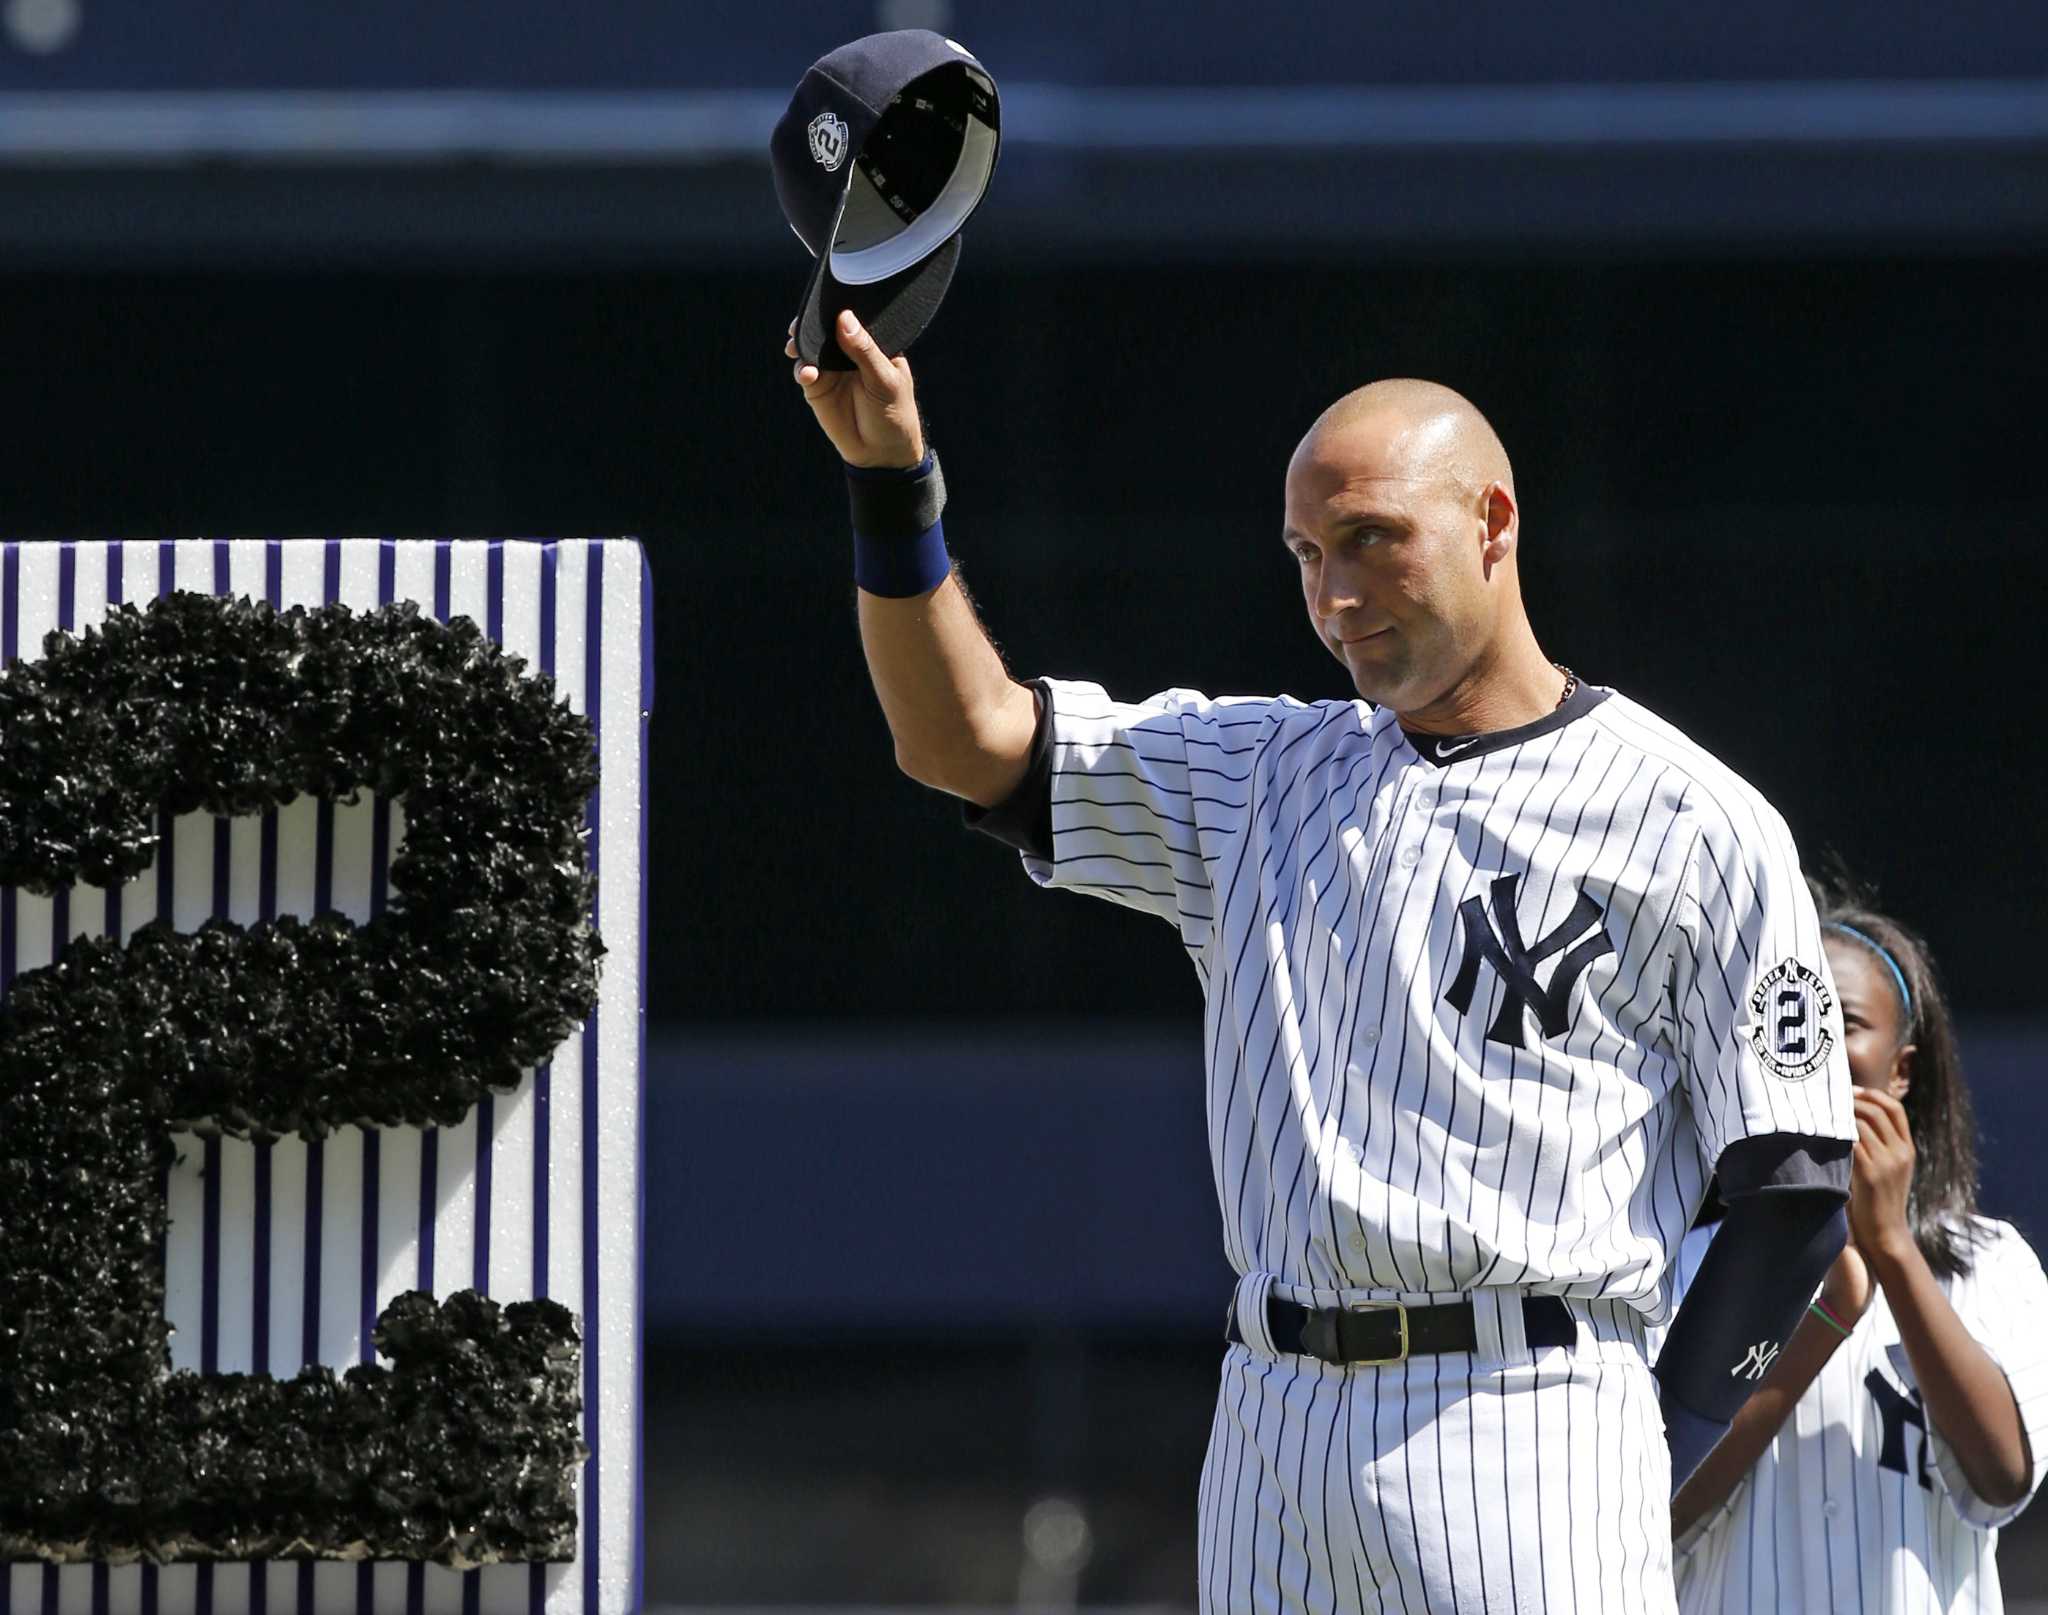 A year after skipping All-Star Game, Yankees shortstop Derek Jeter